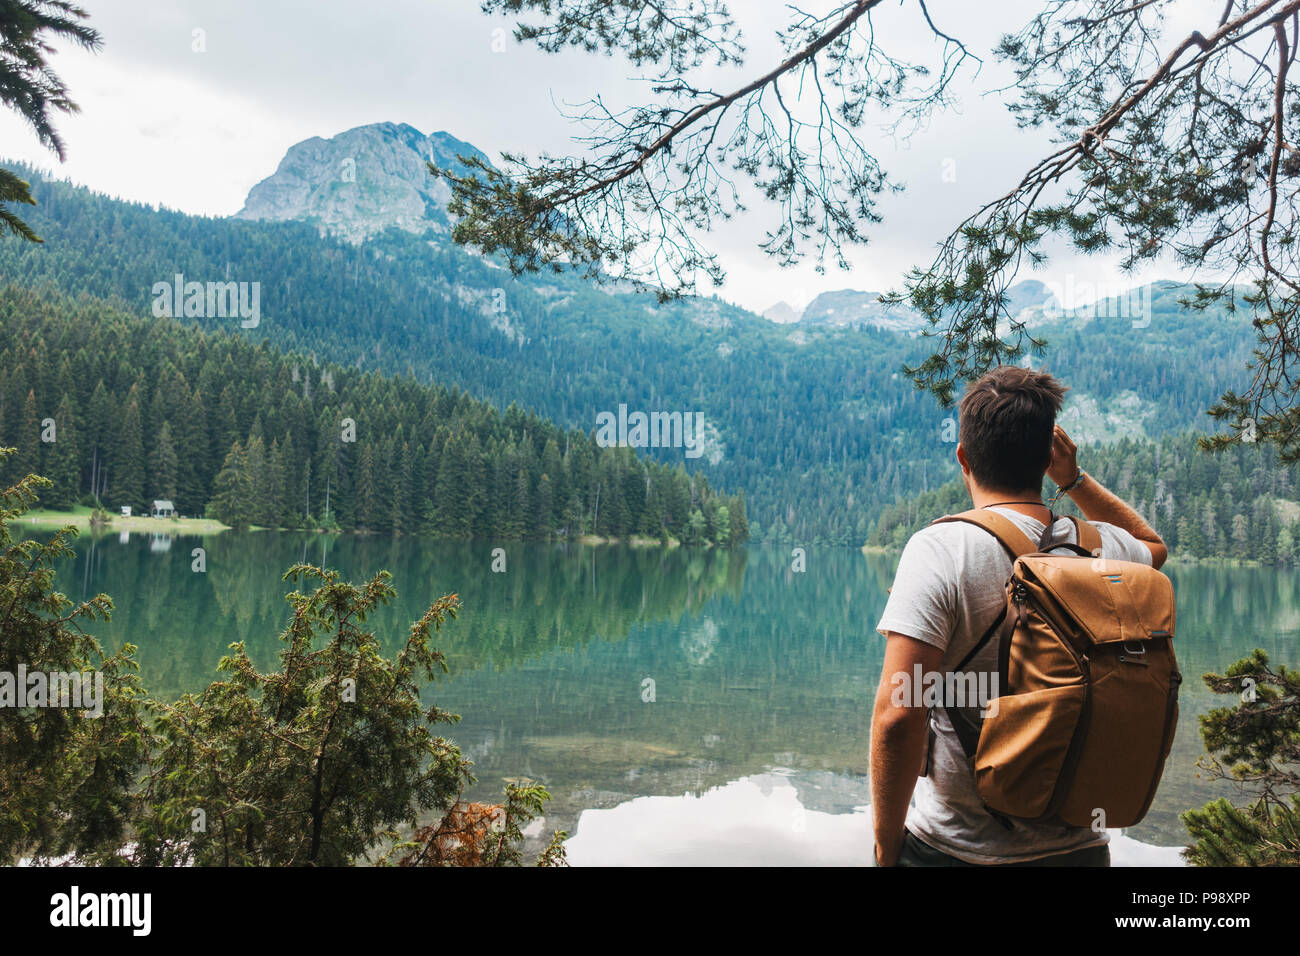 A male tourist stops to admire the perfectly clear, still lake in Durmitor National Park, Montenegro Stock Photo